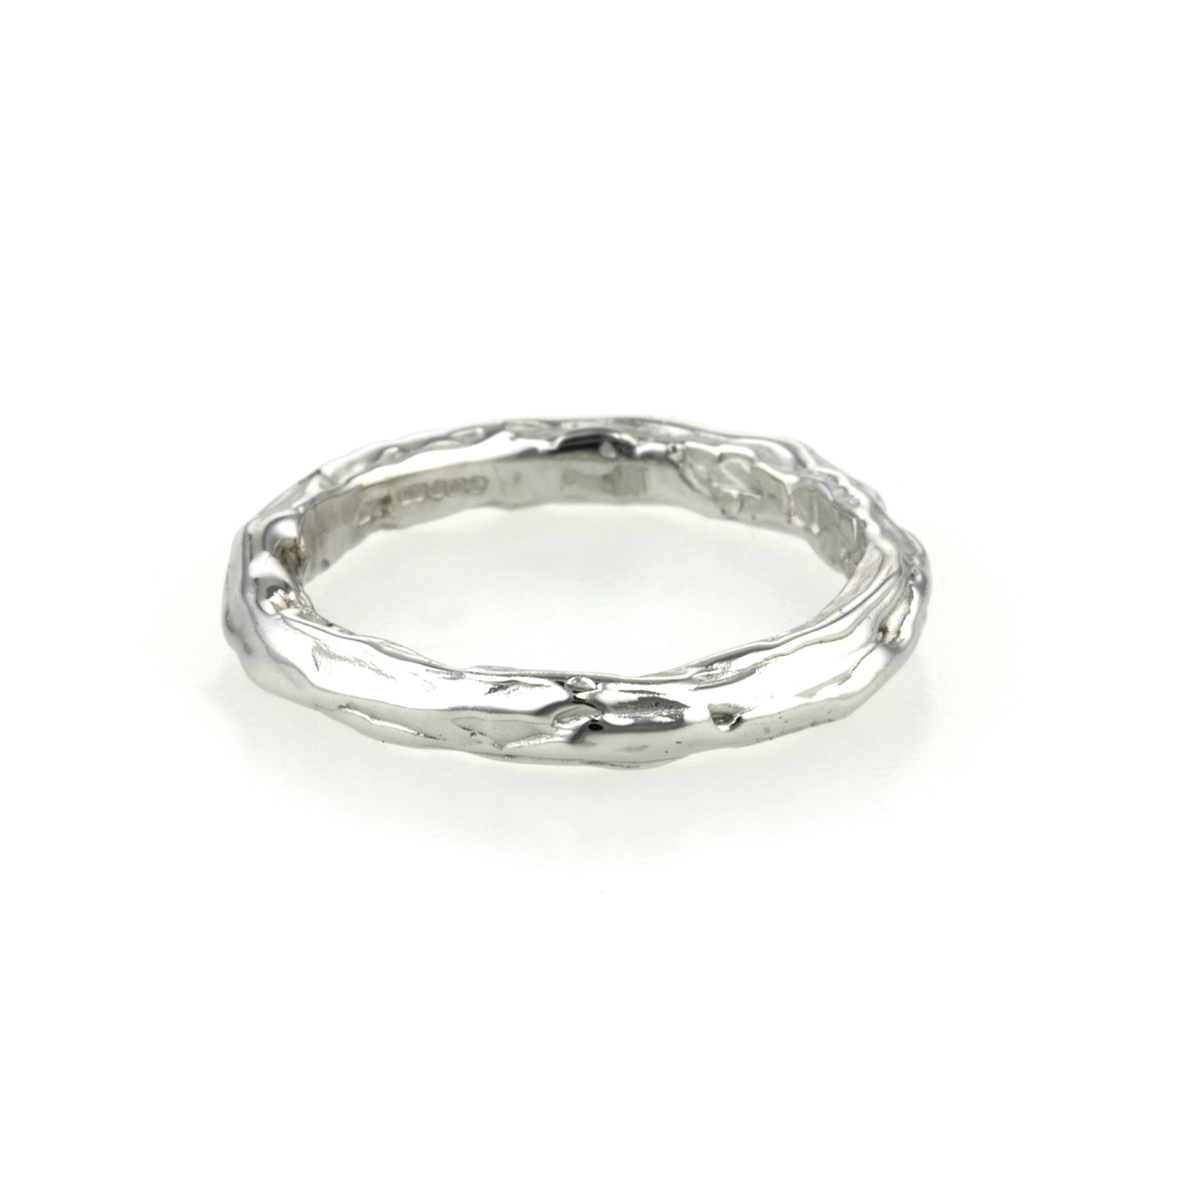 18ct White Gold Twig Inspired Wedding Ring